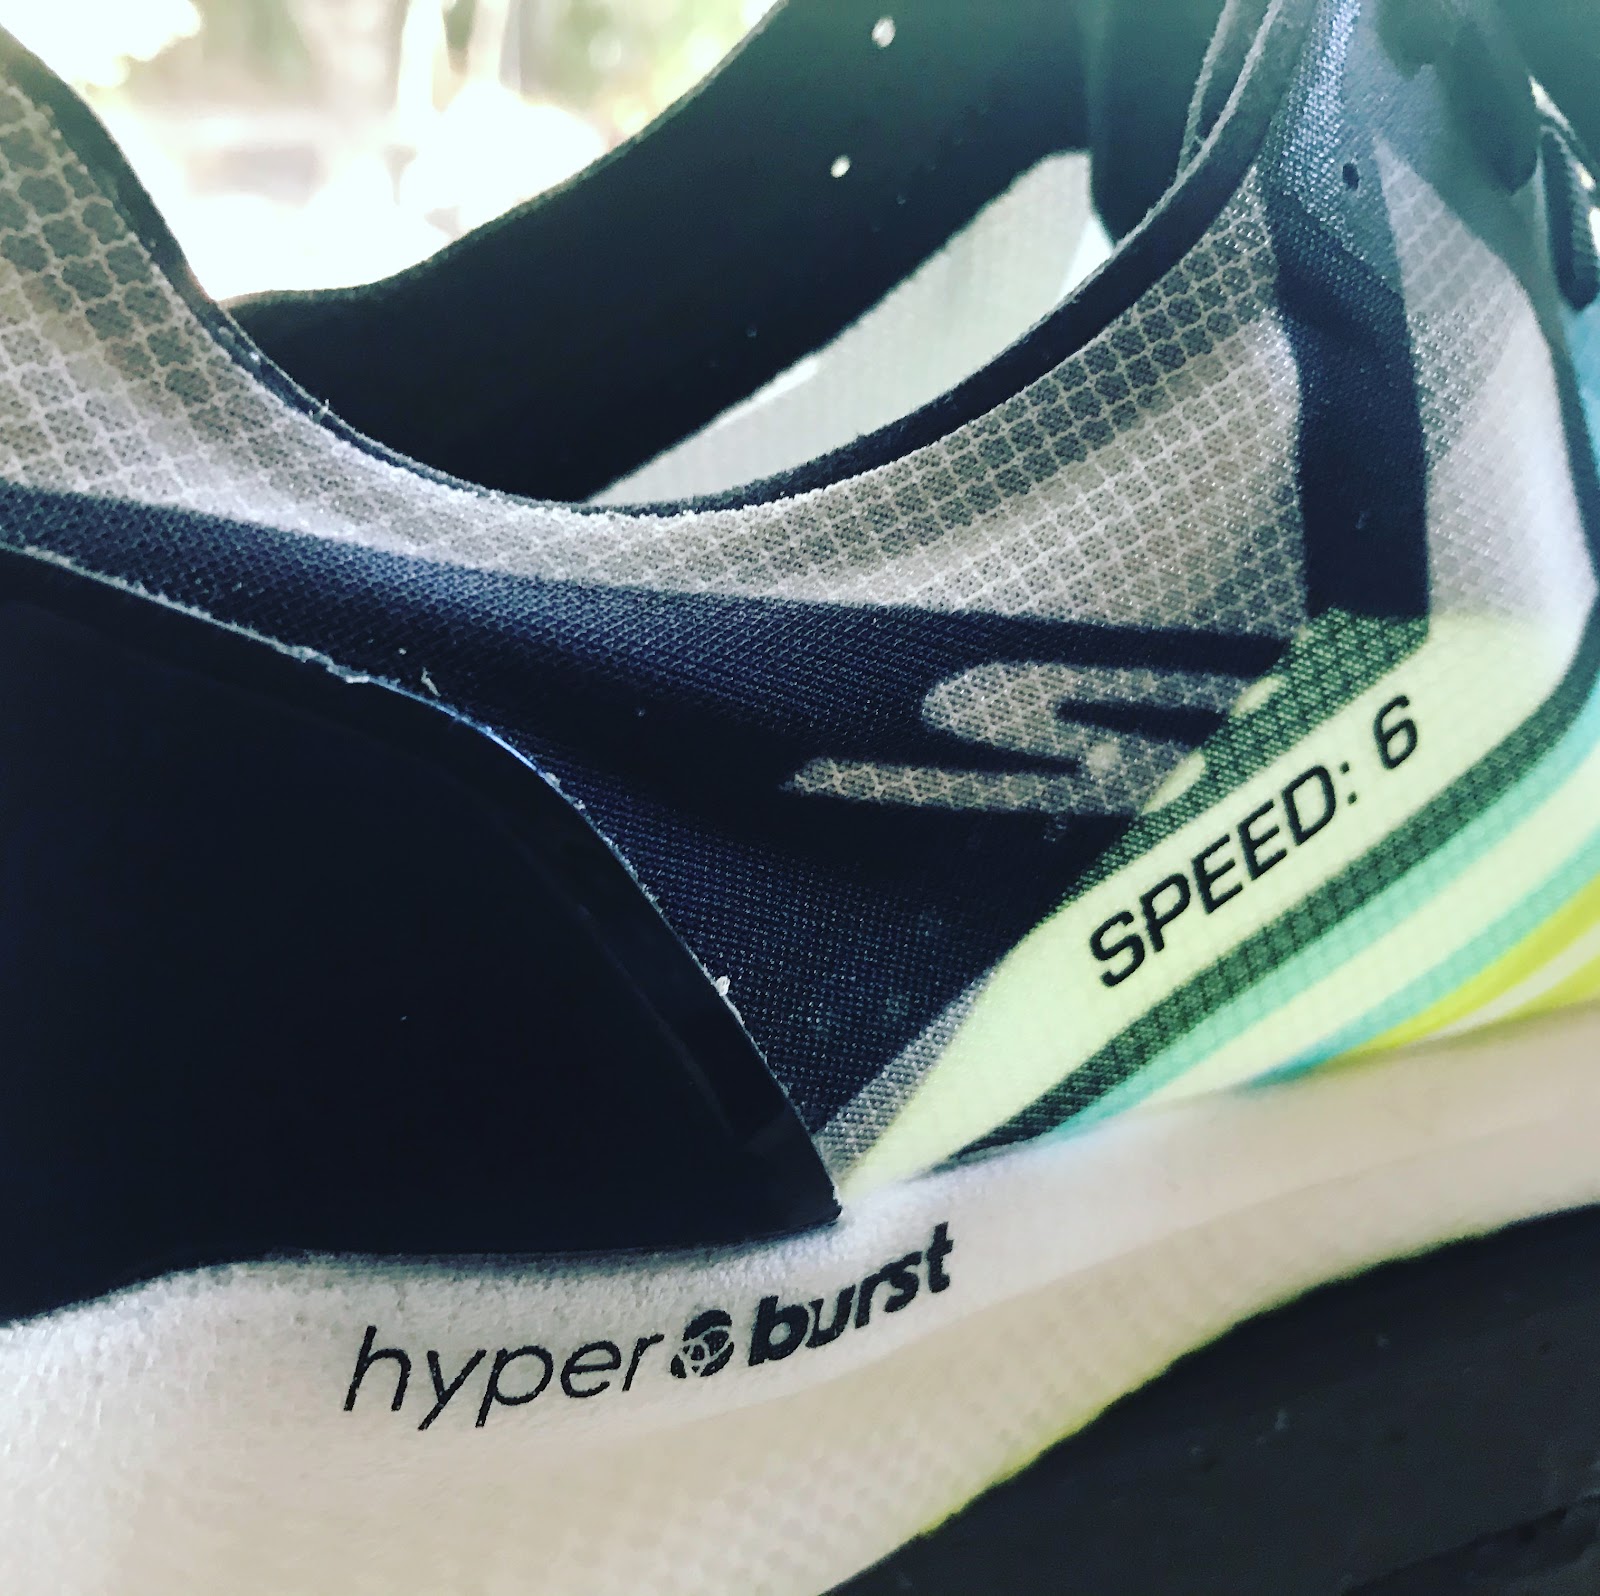 Jep en million Fritagelse Road Trail Run: Skechers Performance Go Meb Speed 6 Hyper Multi Tester  Review. Speed Indeed!